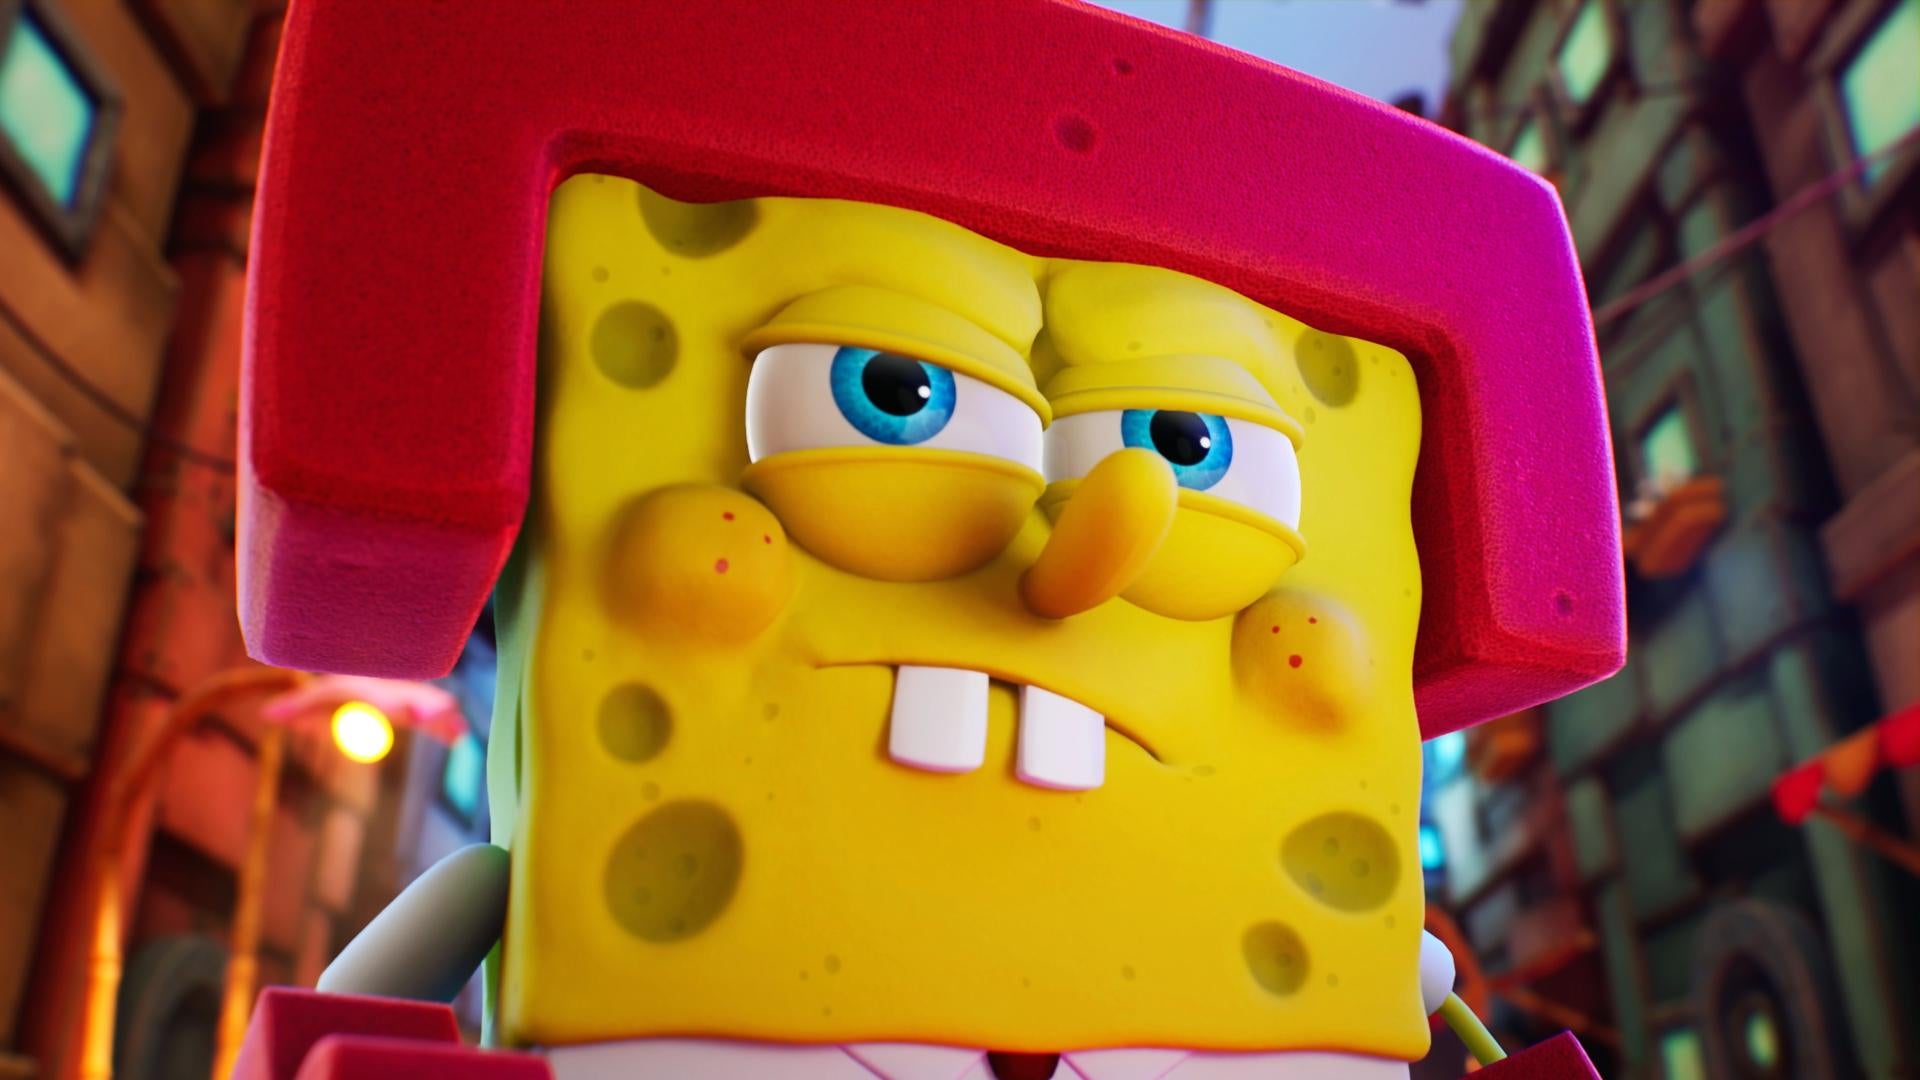 While you were bubble blowing, SpongeBob studied karate. (Image: THQ Nordic)